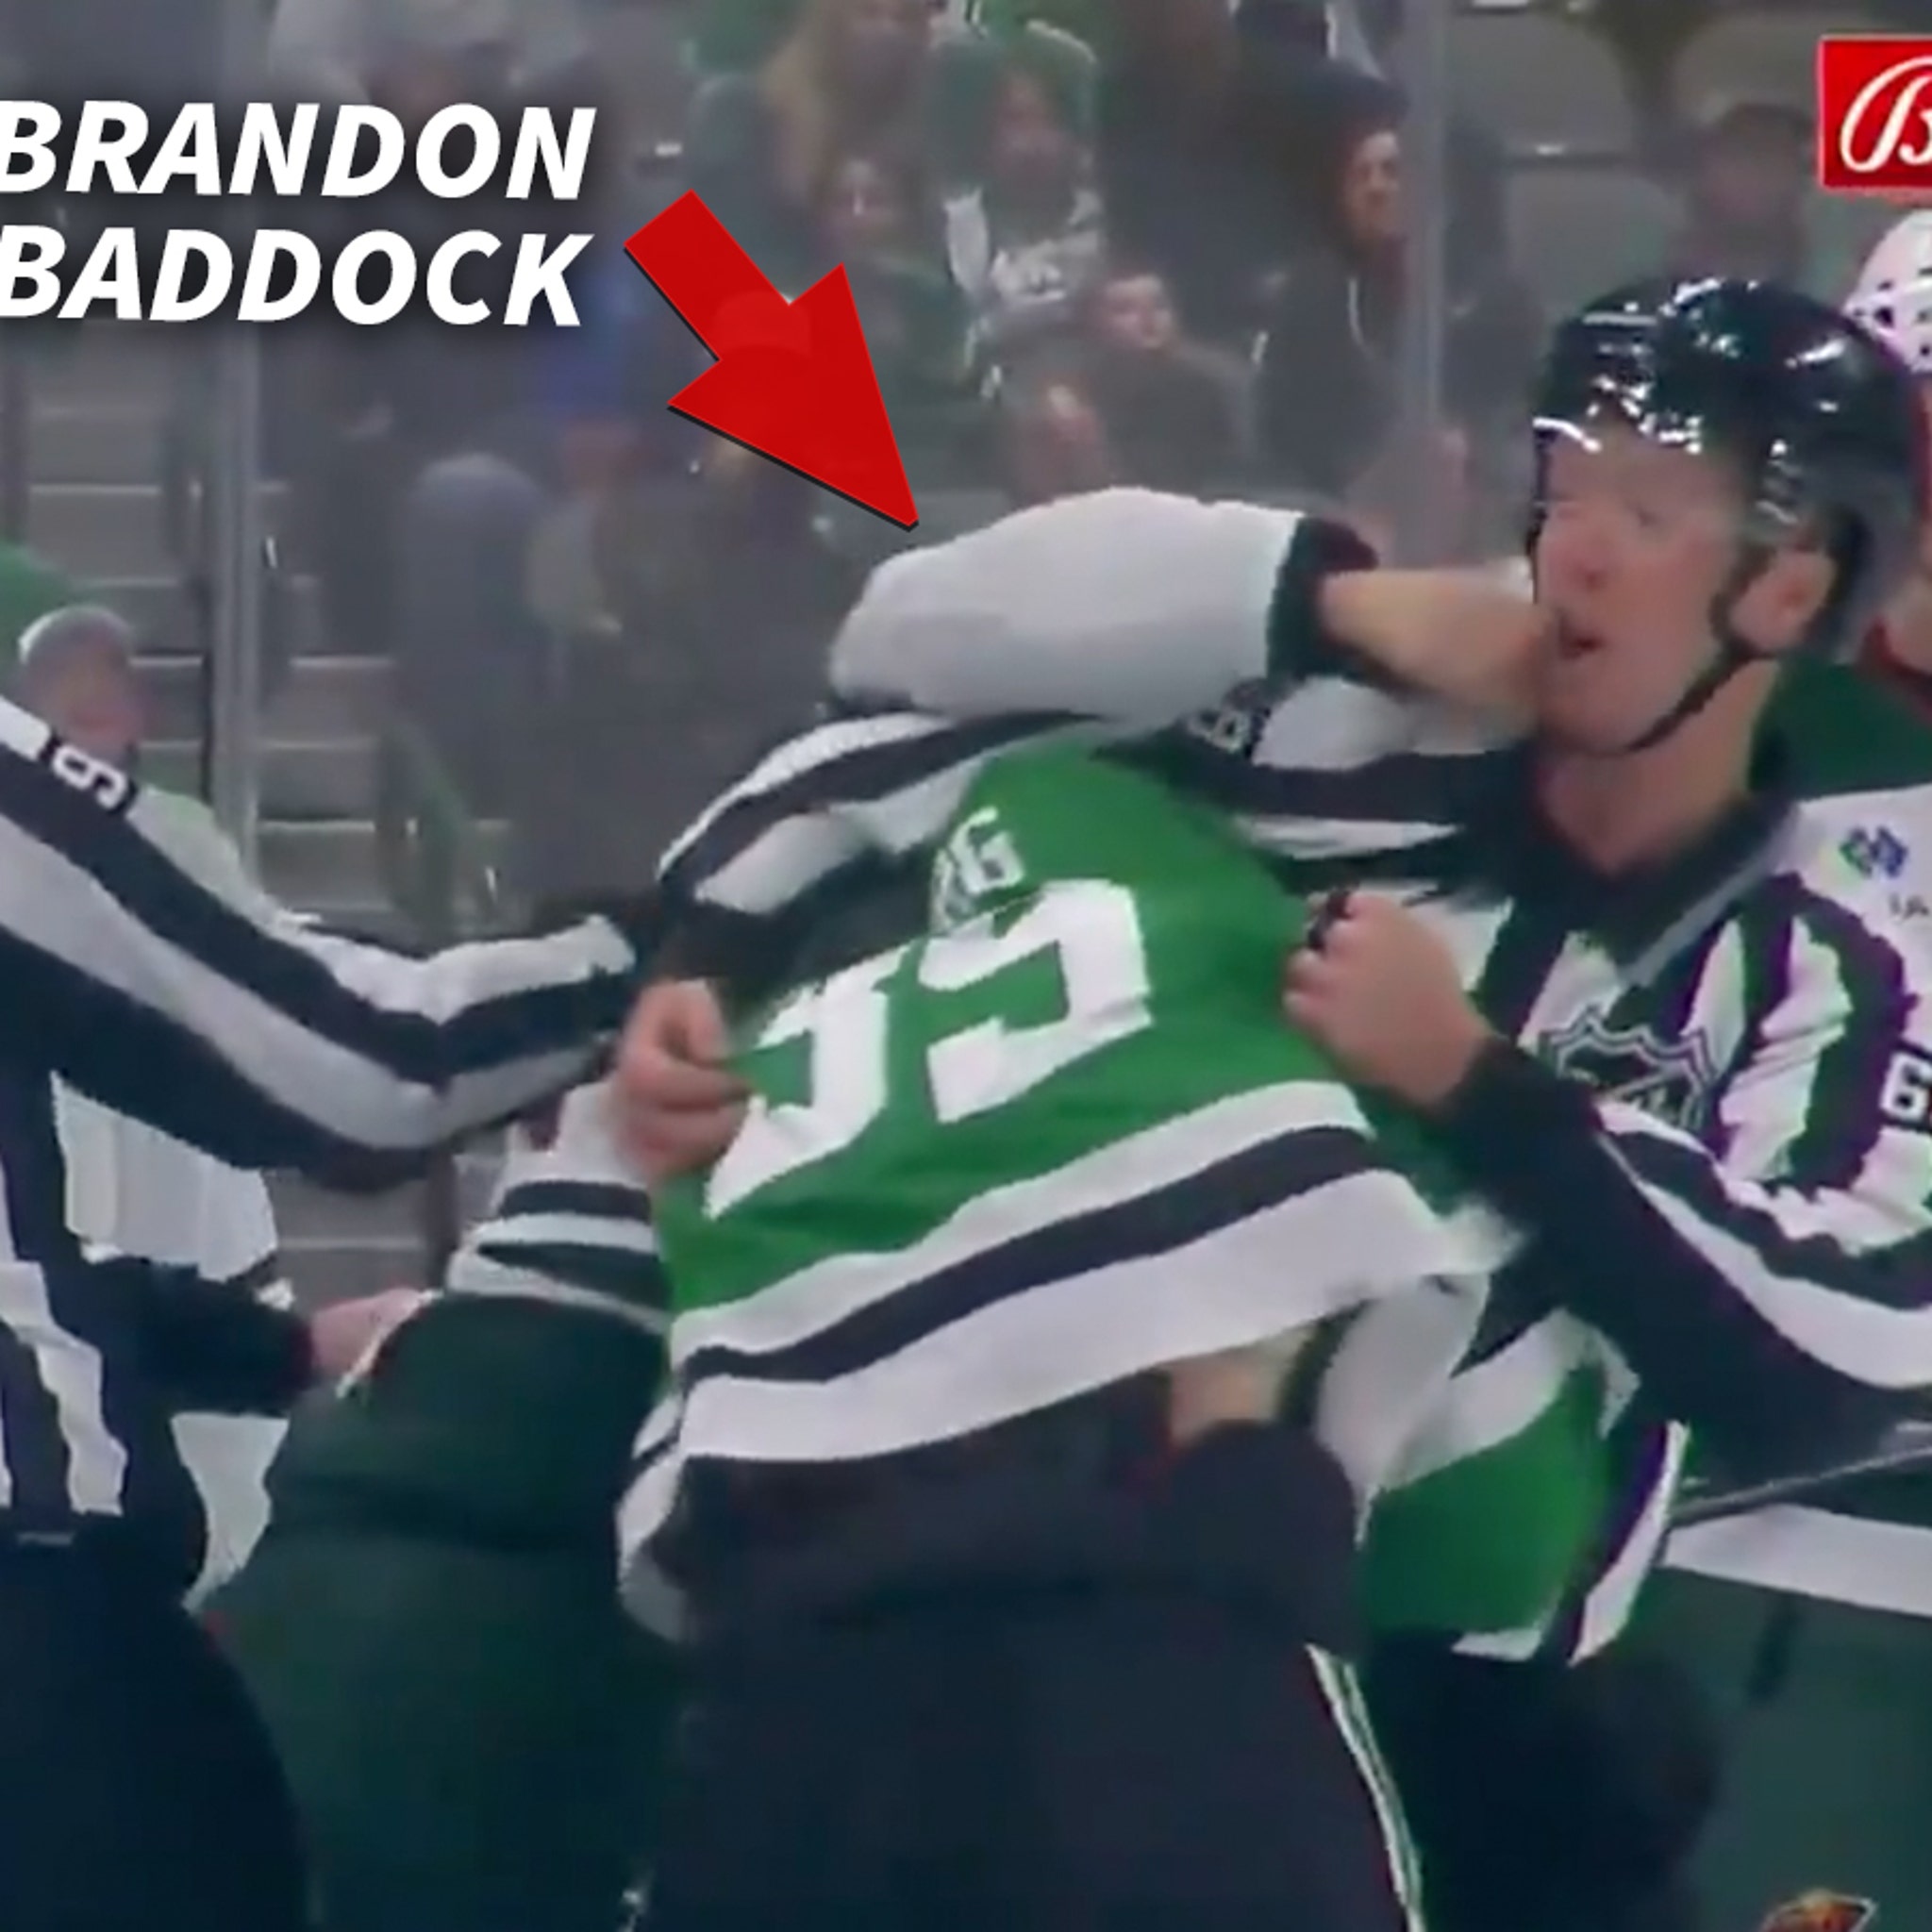 NHL players forced to fight after clean hit shouldn't face penalties